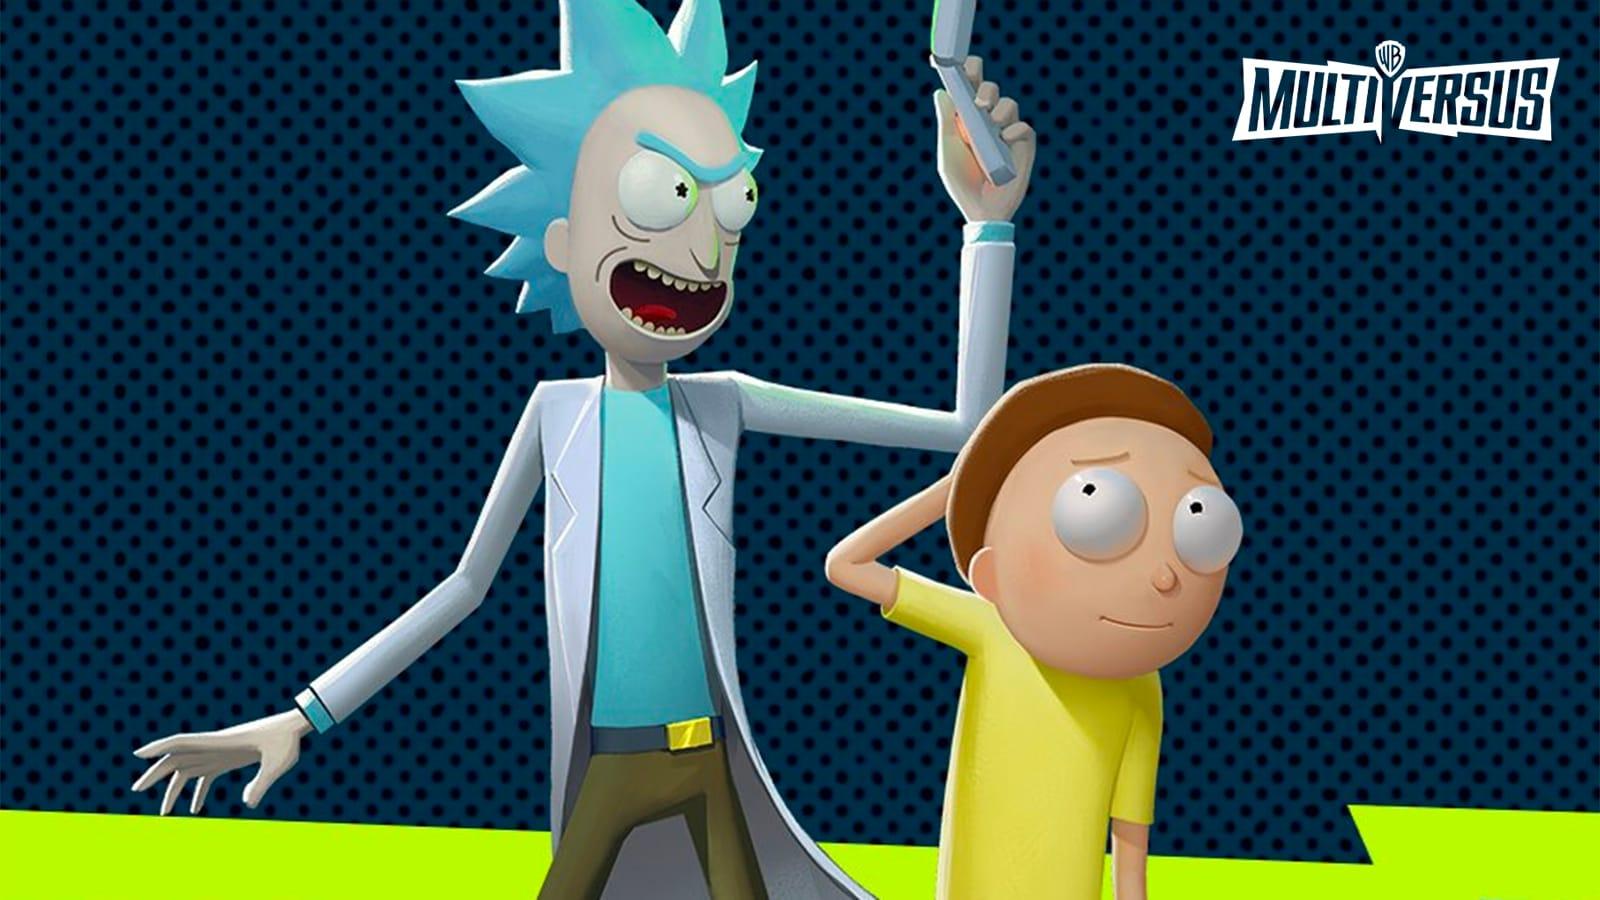 Rick and Morty appearing in MultiVersus